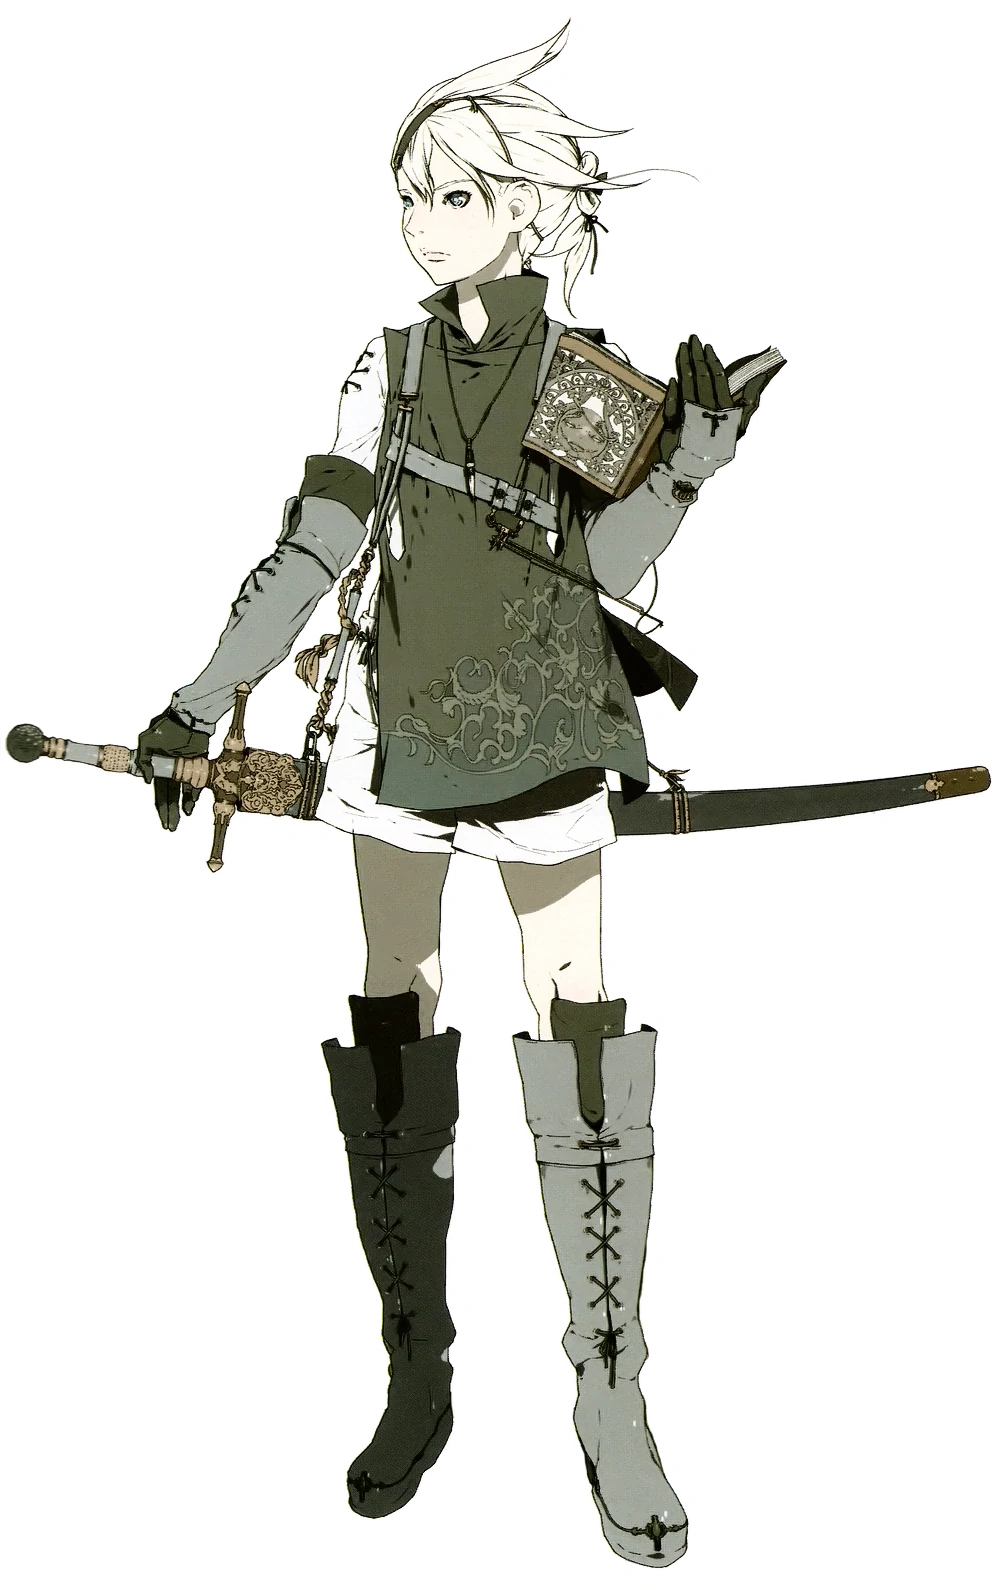 Brother Nier as he appears in the first half of the game. A young boy with white hair in a short tunic and long grey boots, holding Grimoire Weiss in one hand and a sword in the other.